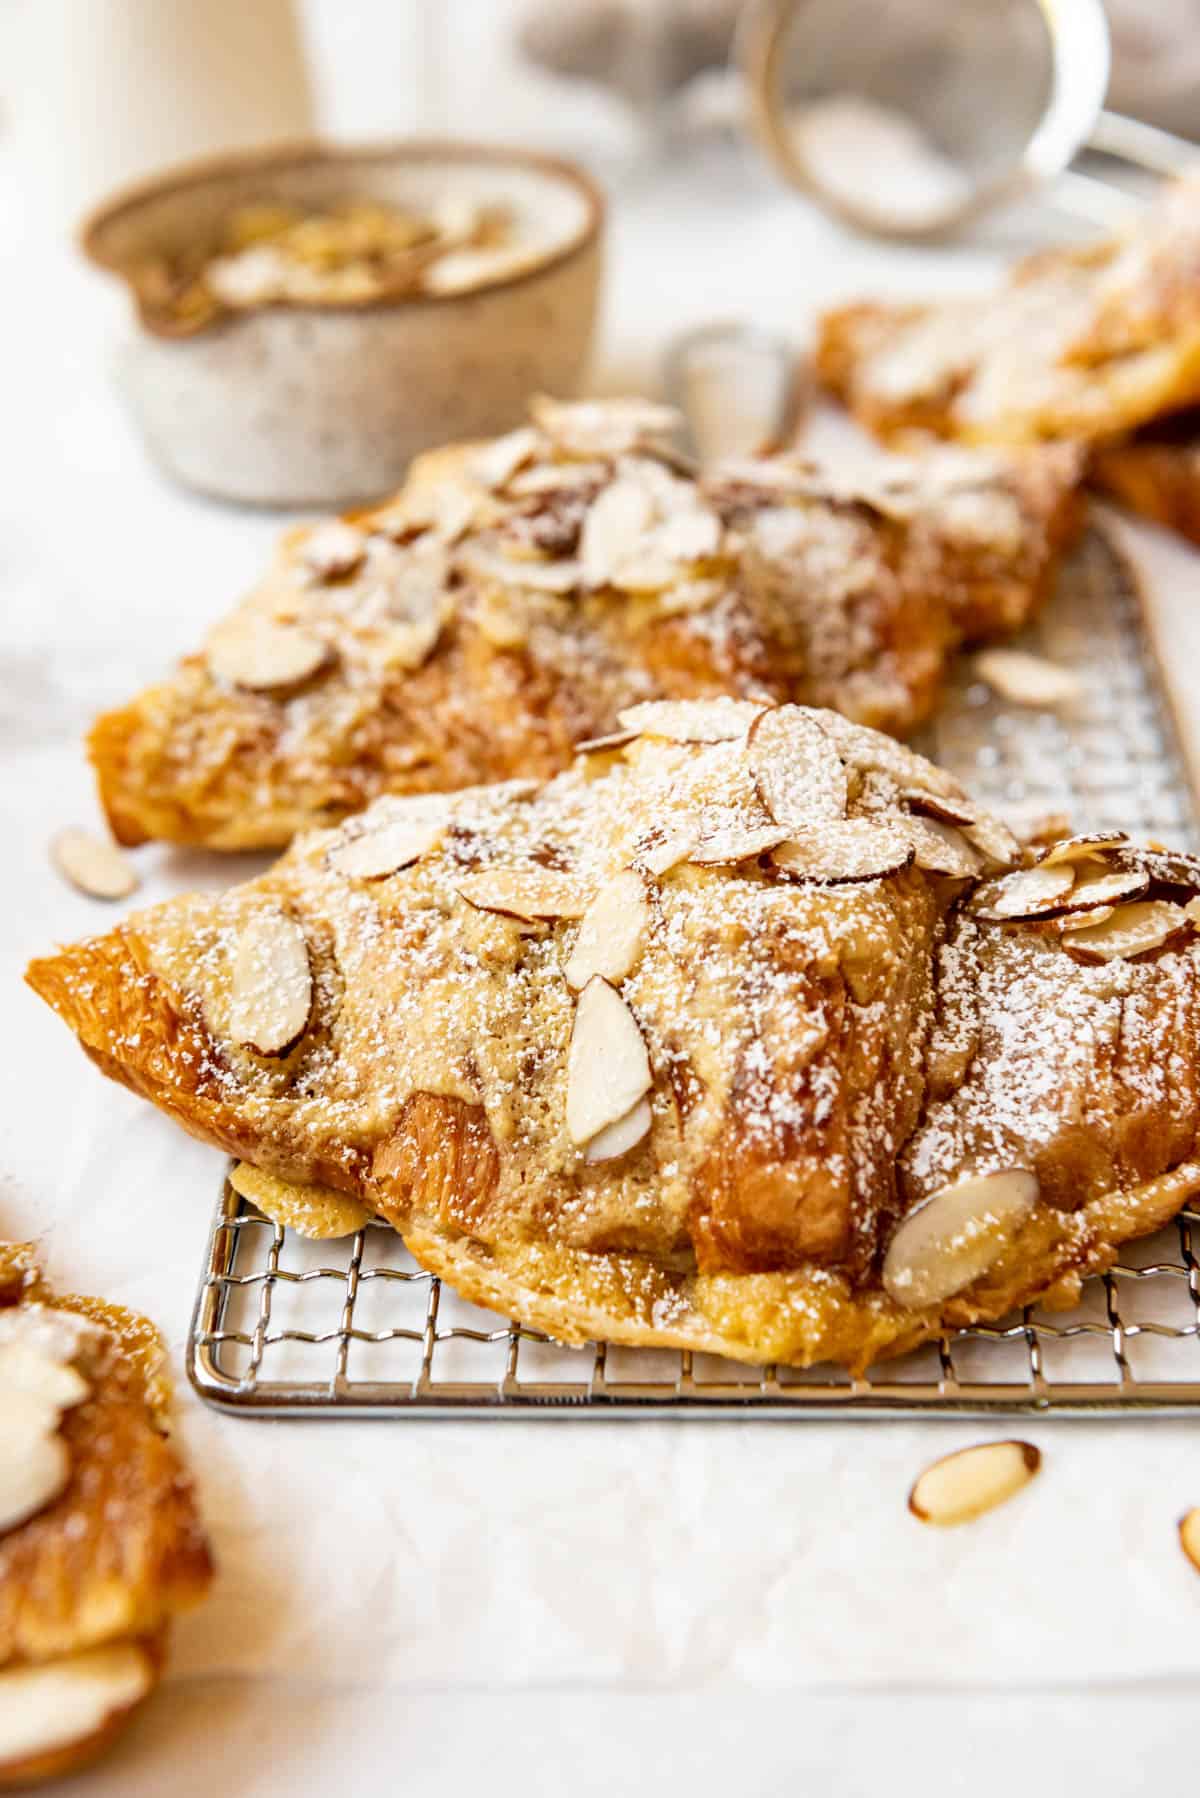 A rich semi-homemade almond croissant on a wire rack topped with slivered almonds and dusted with powdered sugar.